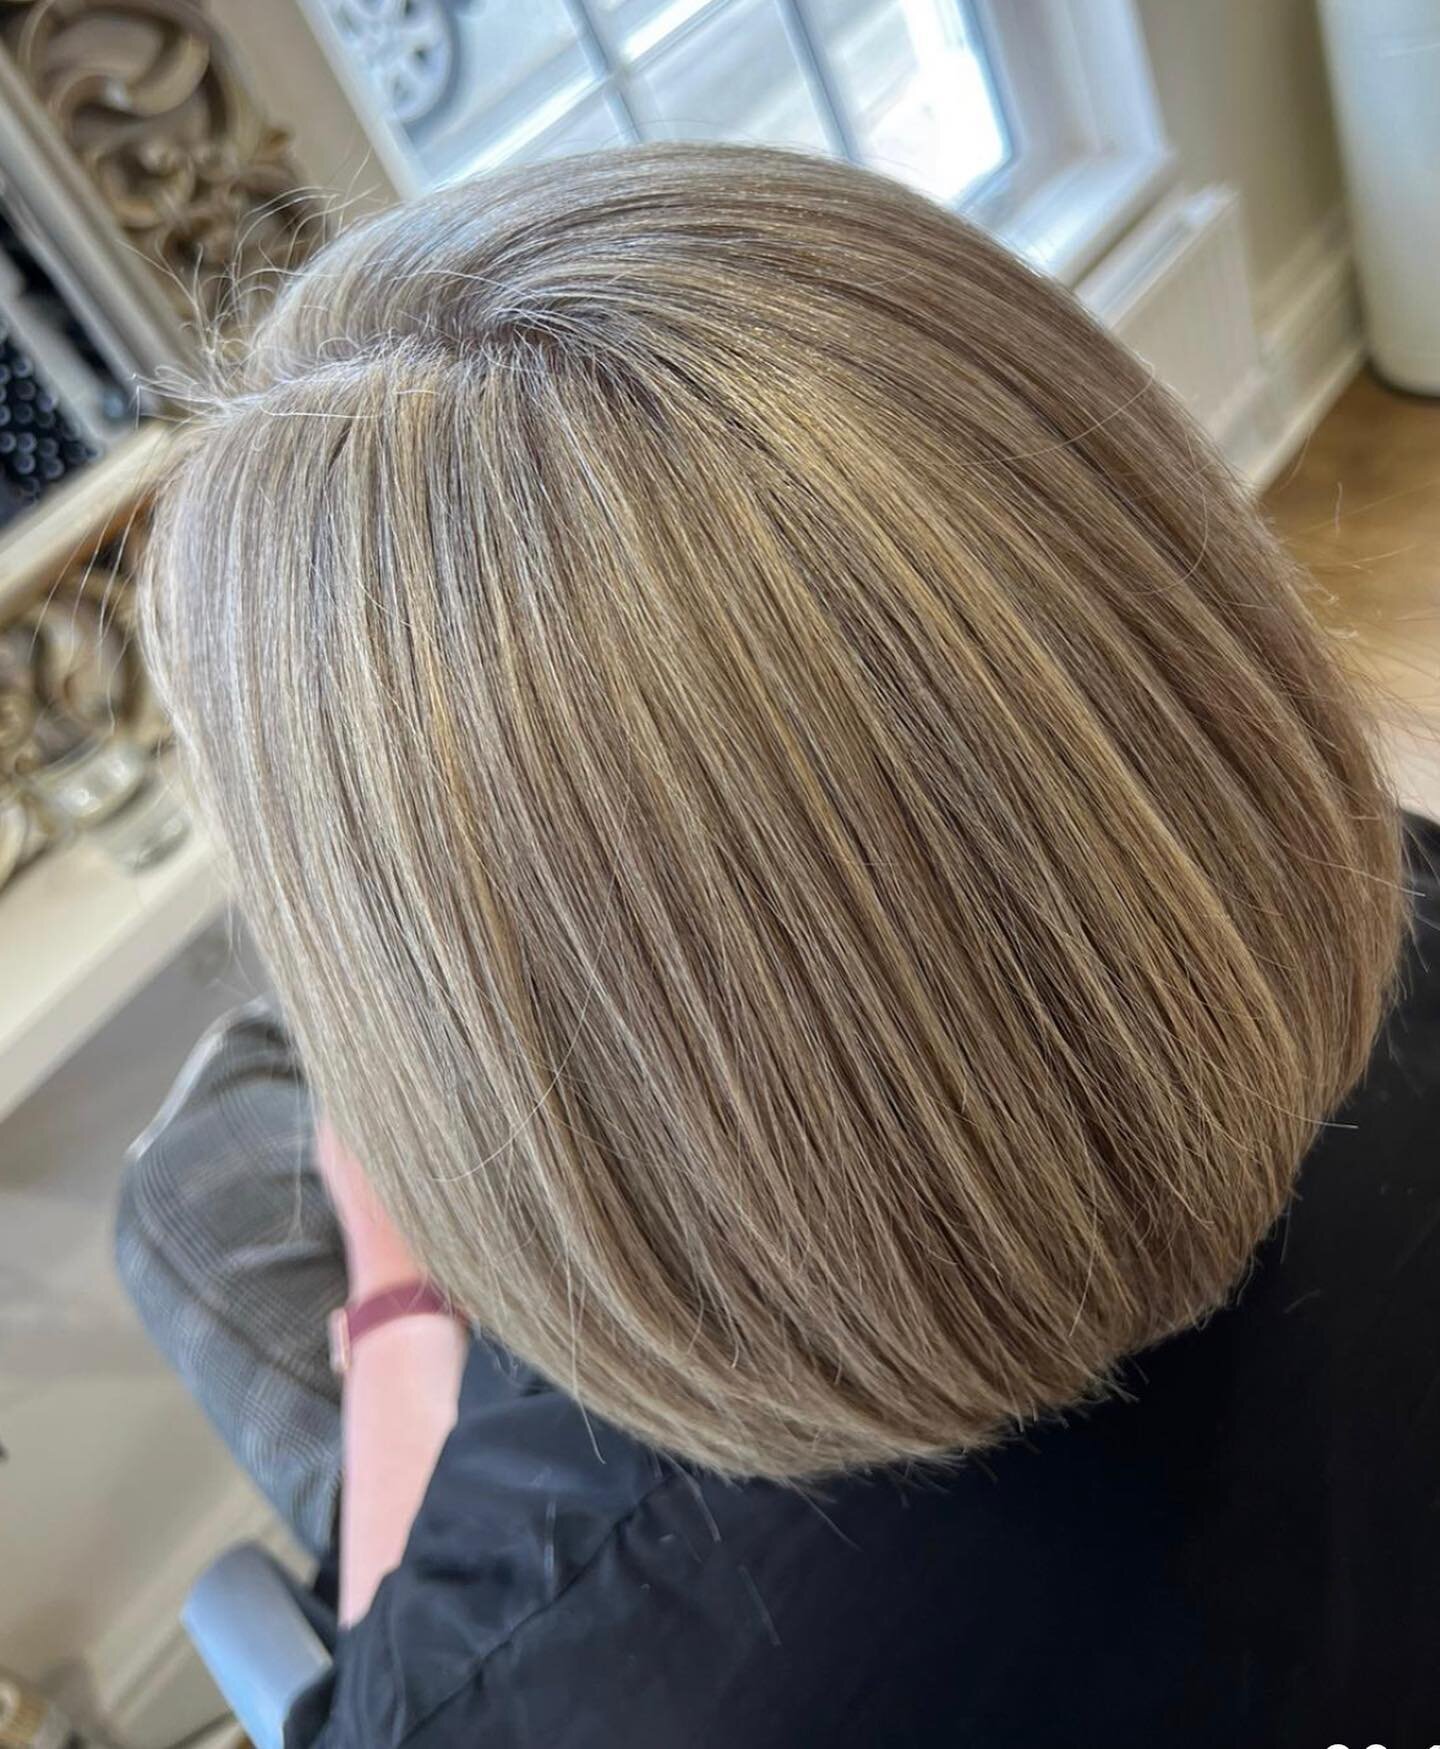 Team work ❤️, blonde highlight retouch by our independent designer Tonisha . And restyled by our designer Andrea. A stunning result for our guest by both of our designers . 

Products used : @paulmitchell&nbsp;@paulmitchelluk @xgcolour #olaplex
⏰ &nb